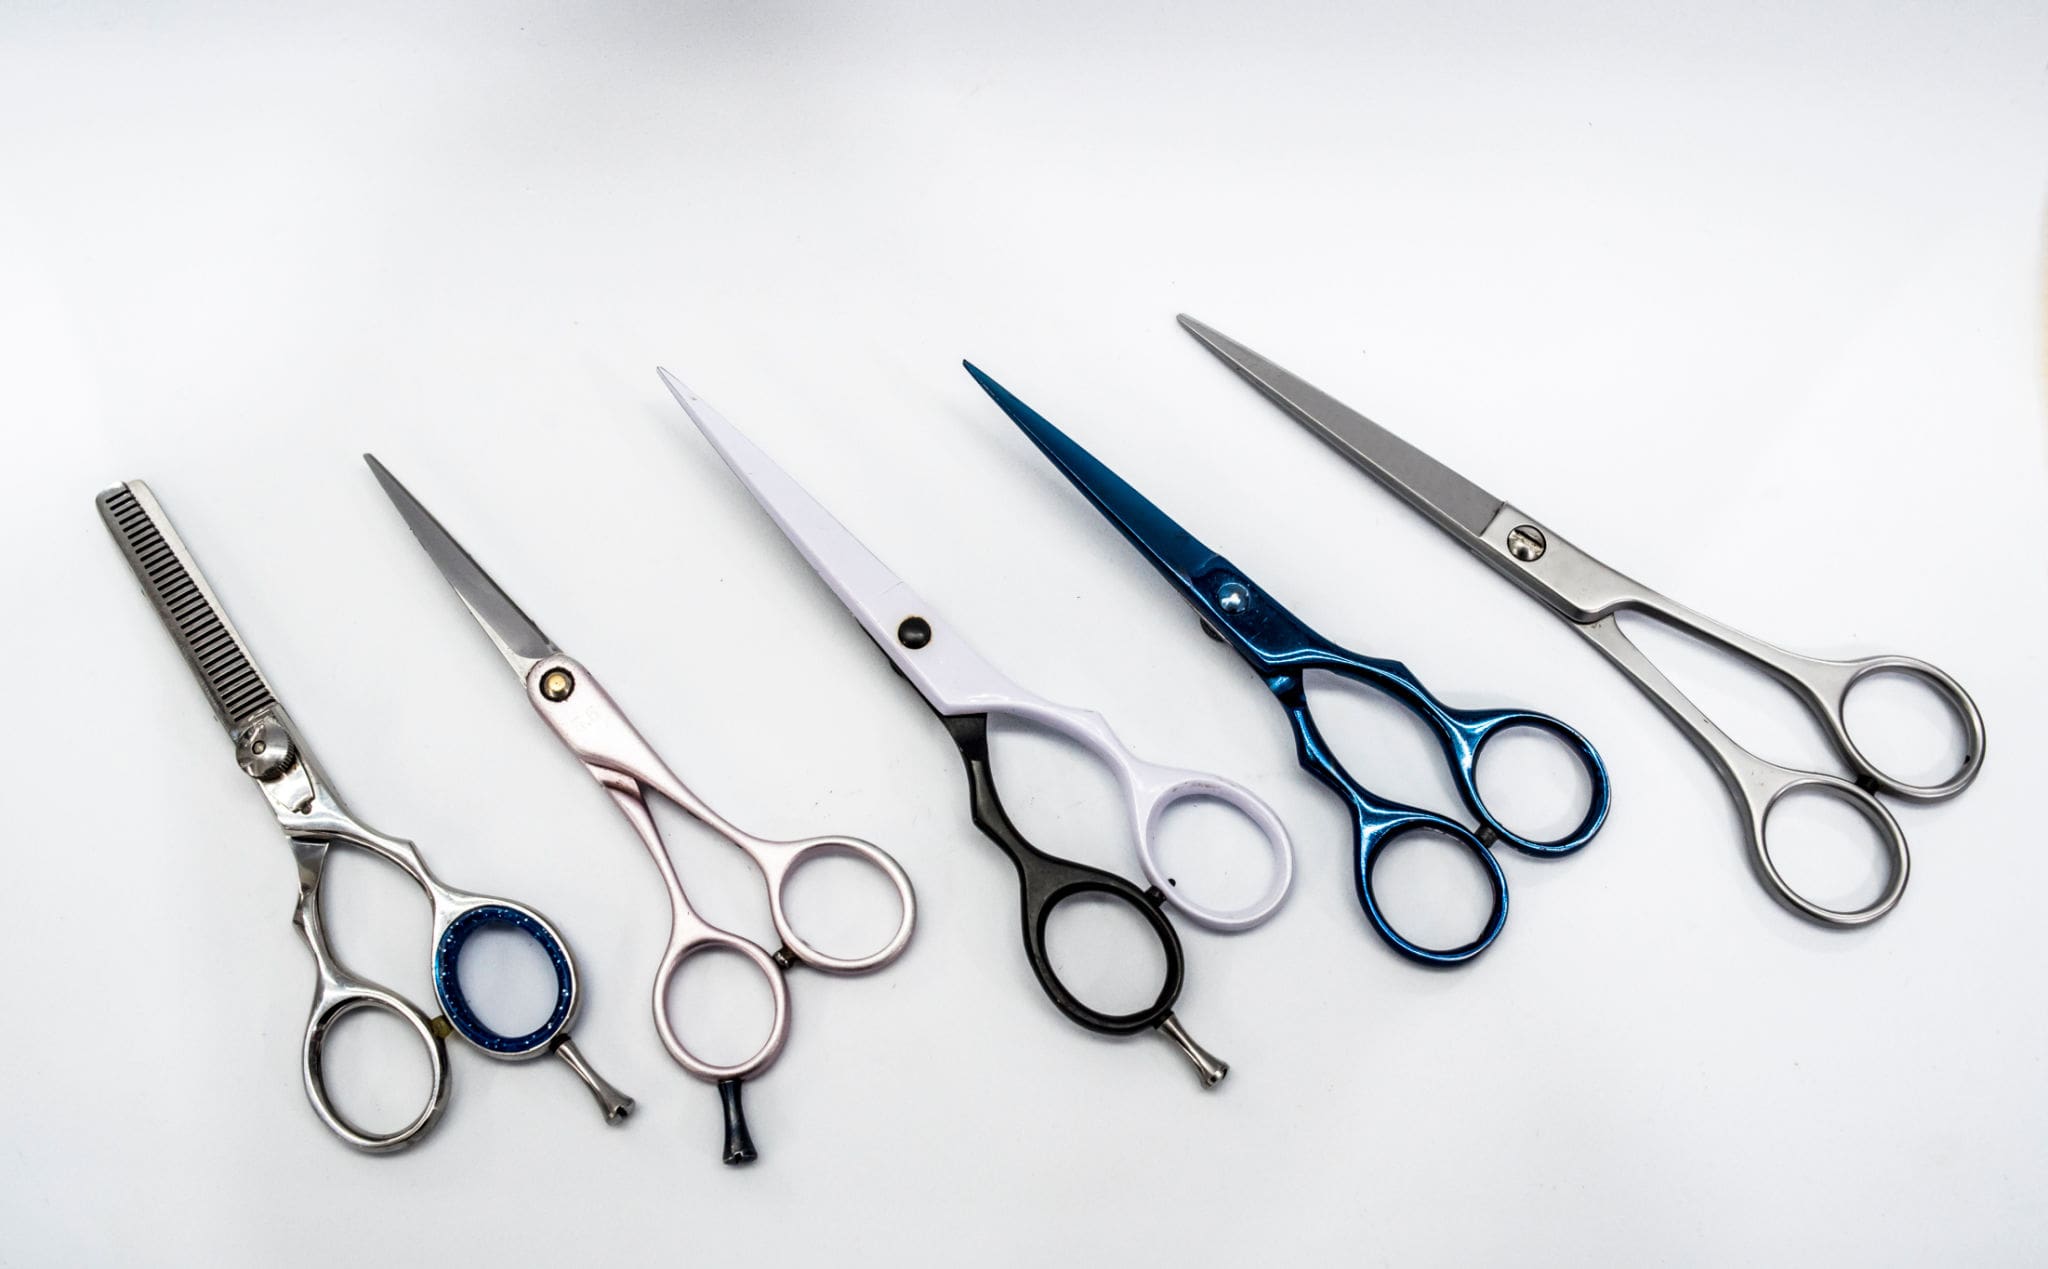 Beauty Care Instruments Manufacturer in Sialkot, Pakistan